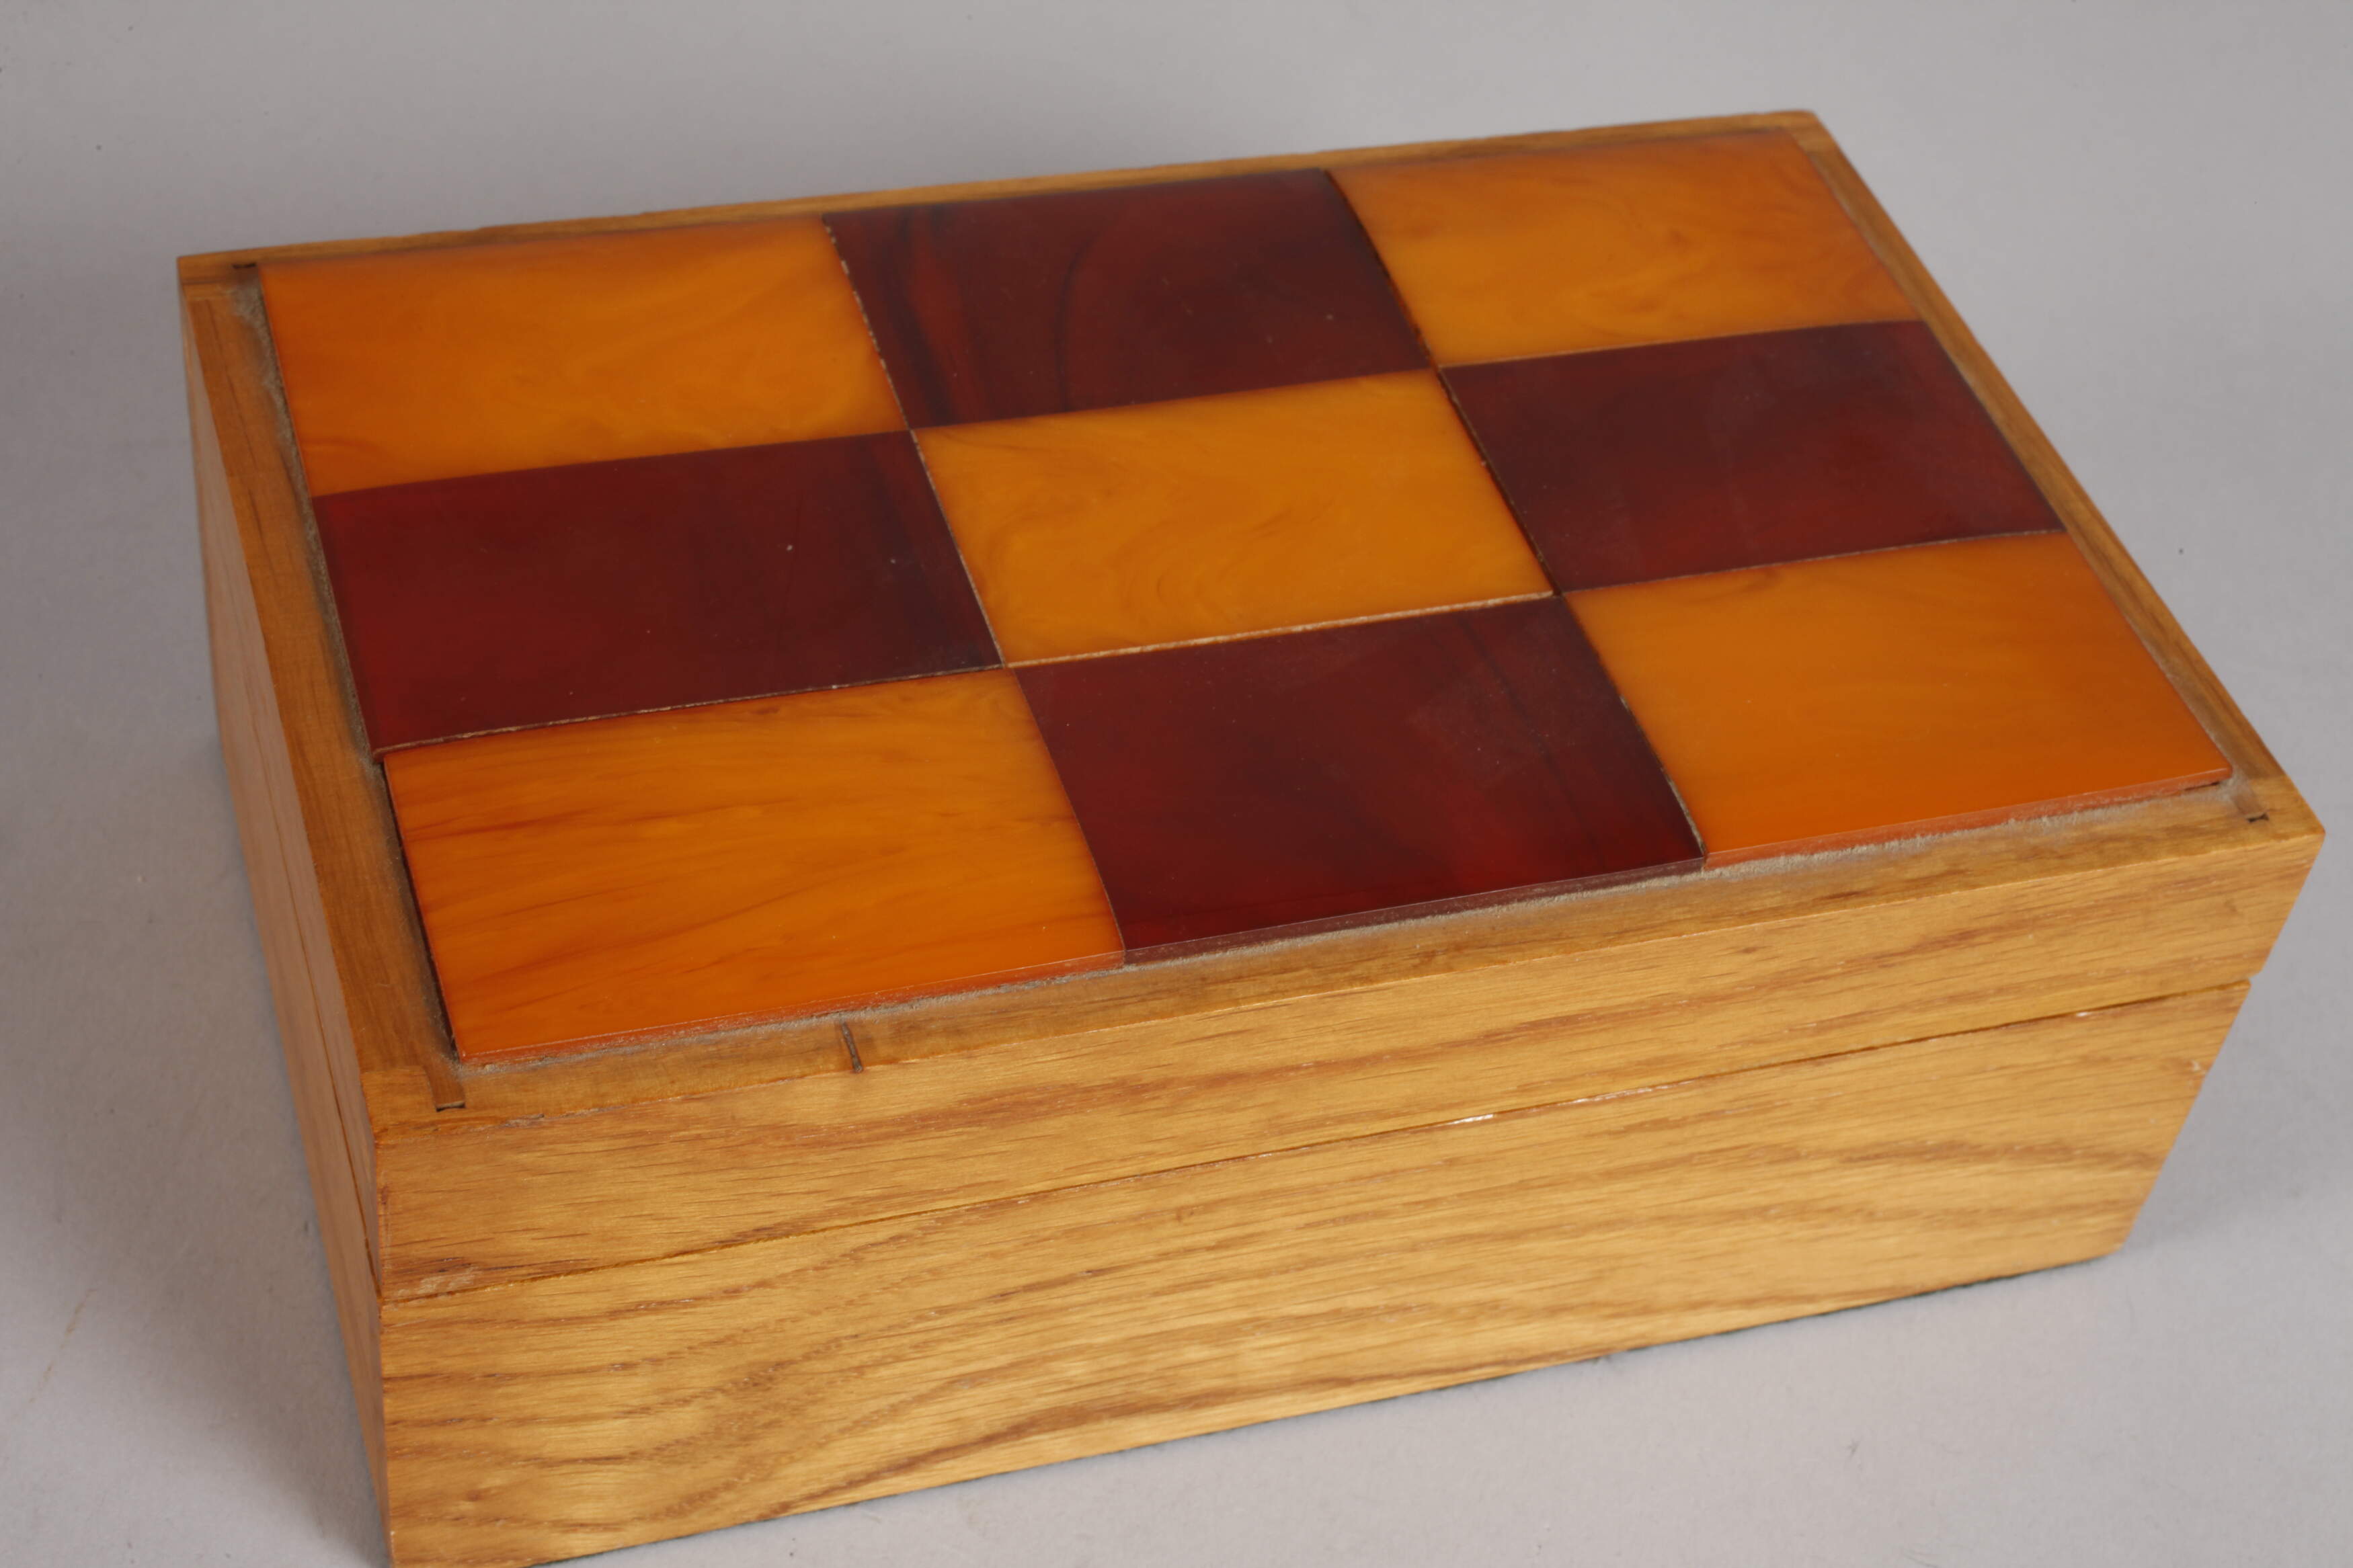 Chess set in amber look - Image 5 of 5